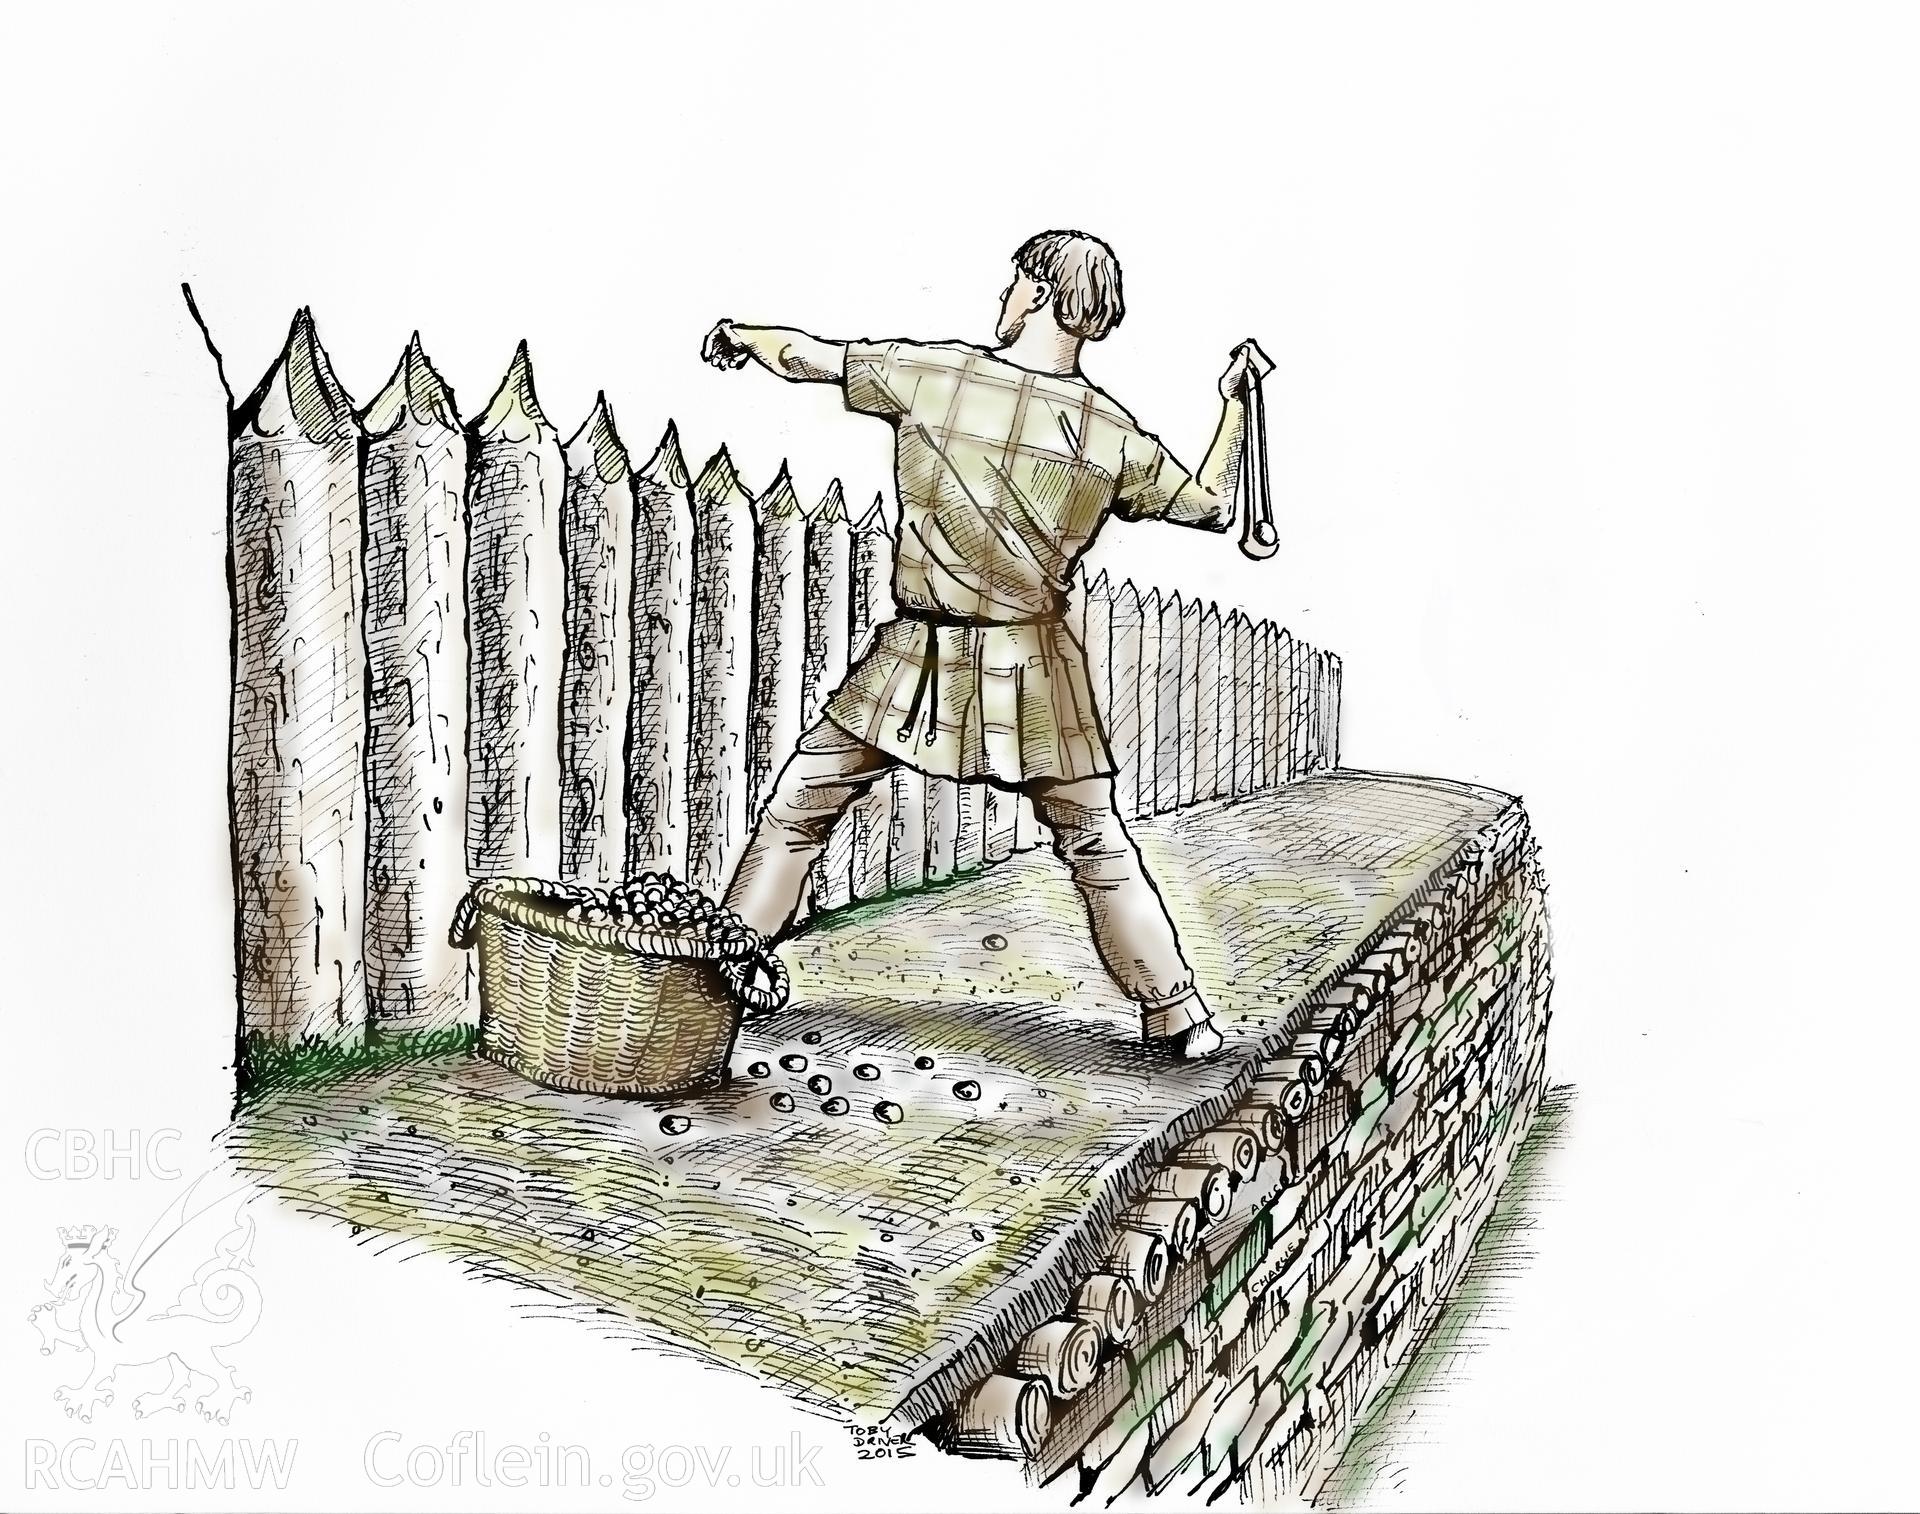 Pen Dinas .jpeg version of a reconstruction drawing showing an Iron Age defender taking aim with his leather sling. Figure 4.24, The Hillforts of Cardigan Bay, Toby Driver.